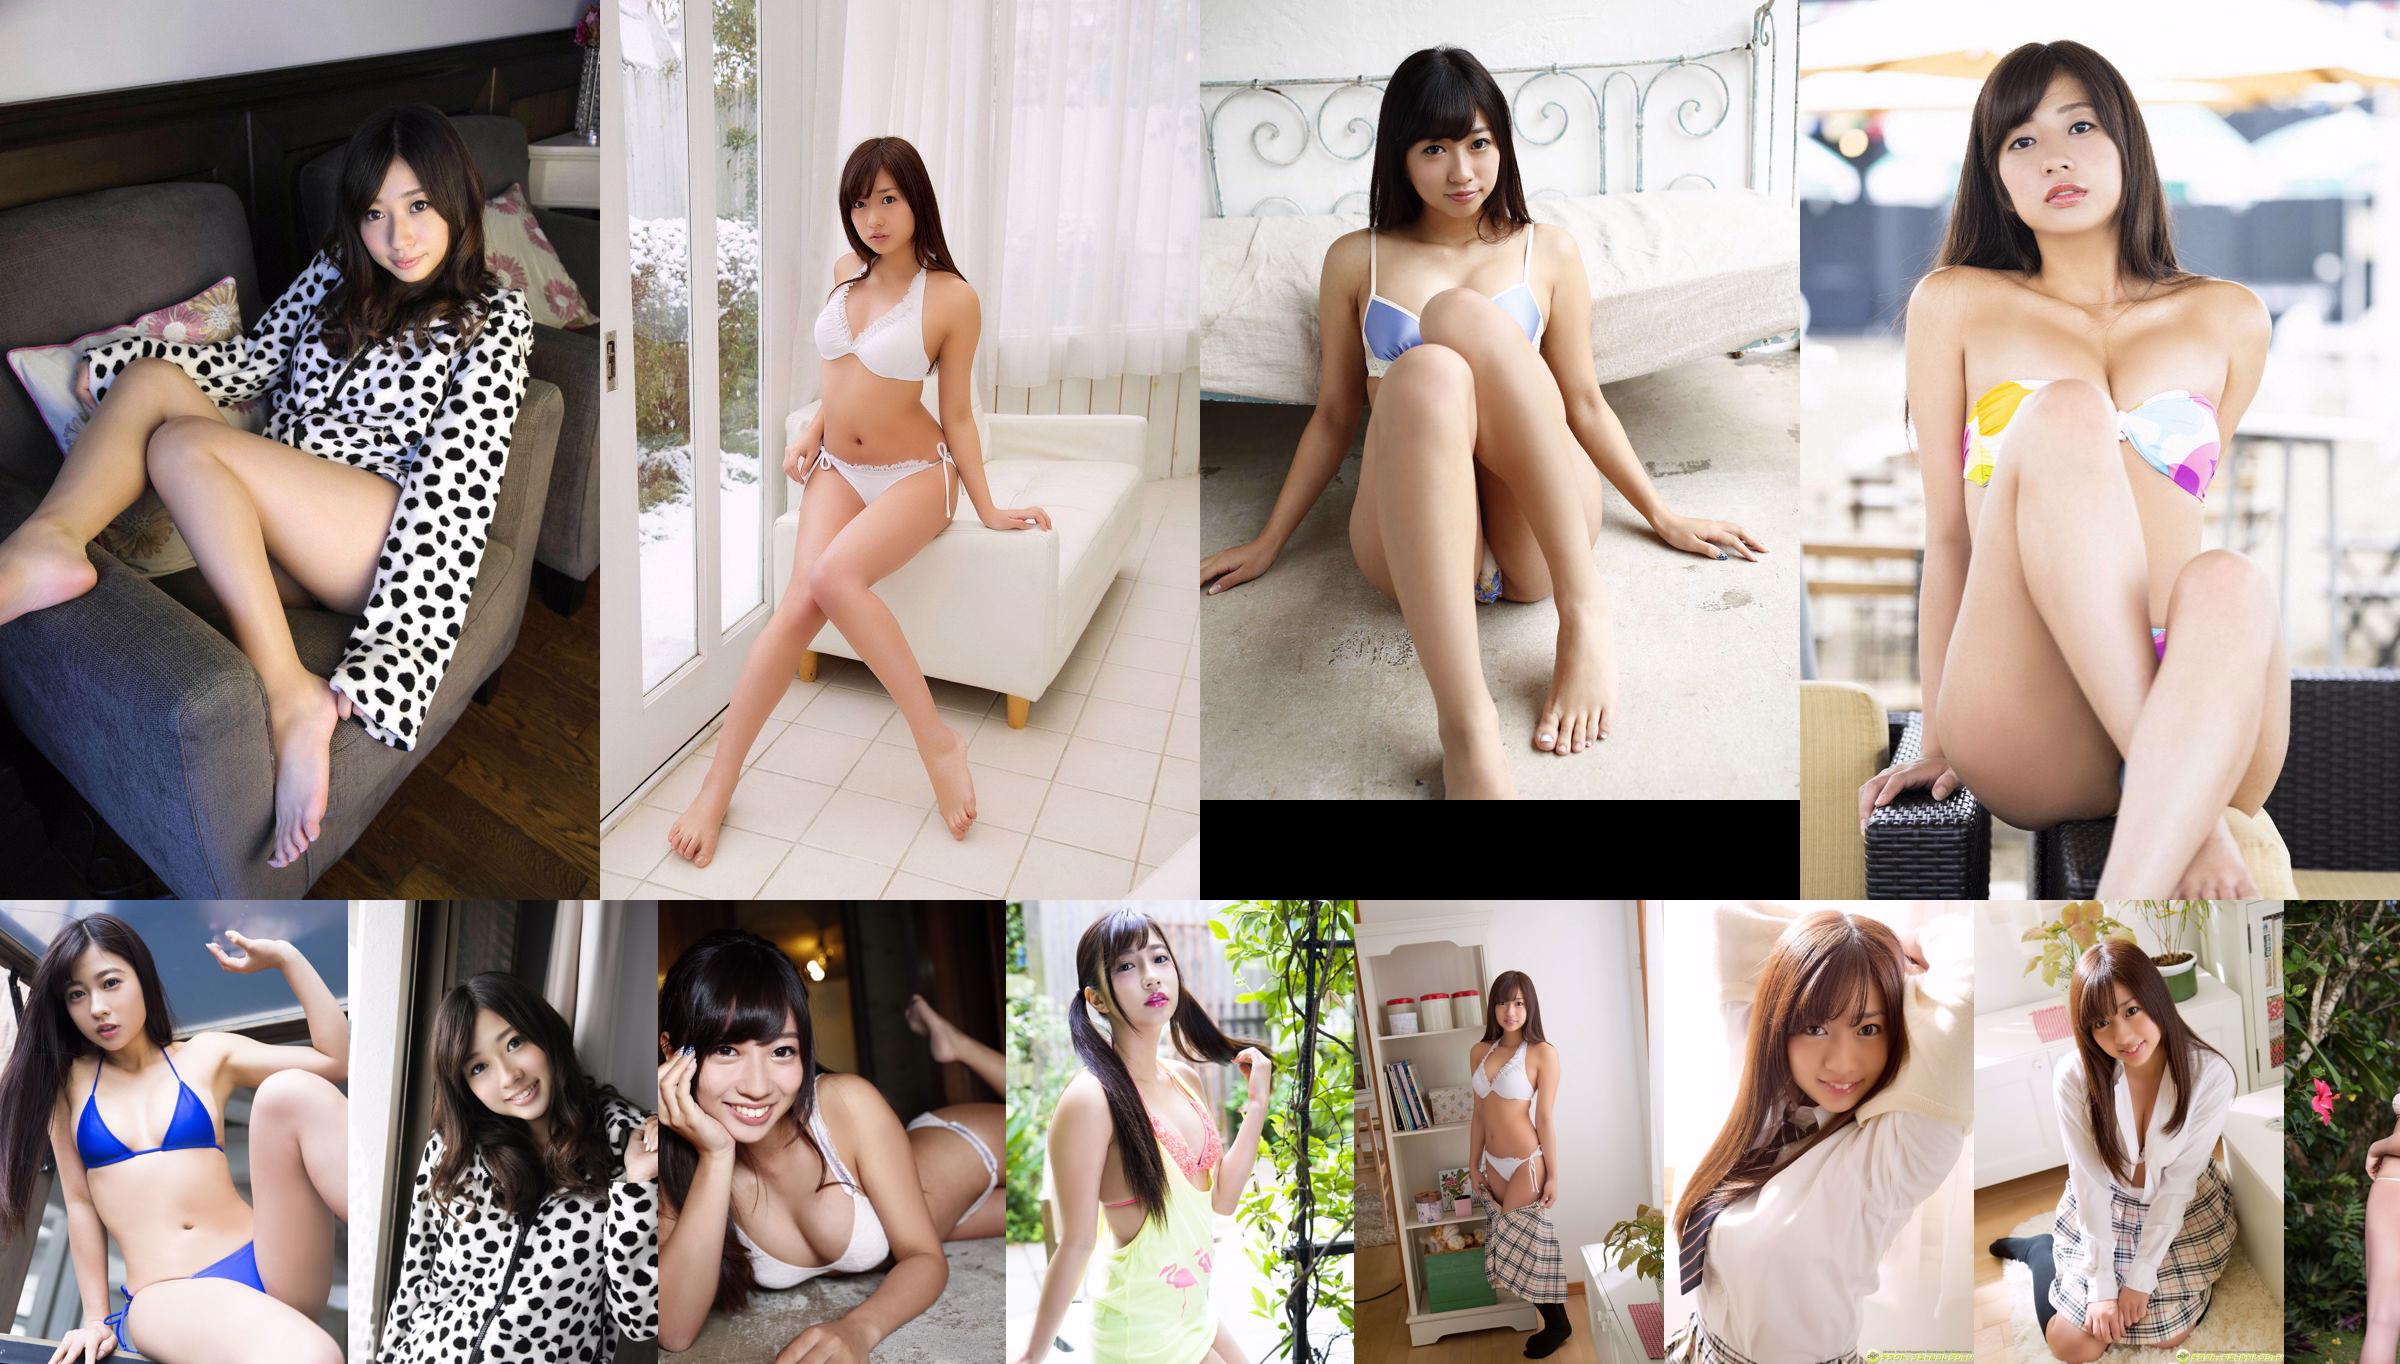 Daikan Ayaka "Queen of Breasts" [Sabra.net] Strictly Girl No.ae7c8d Page 8